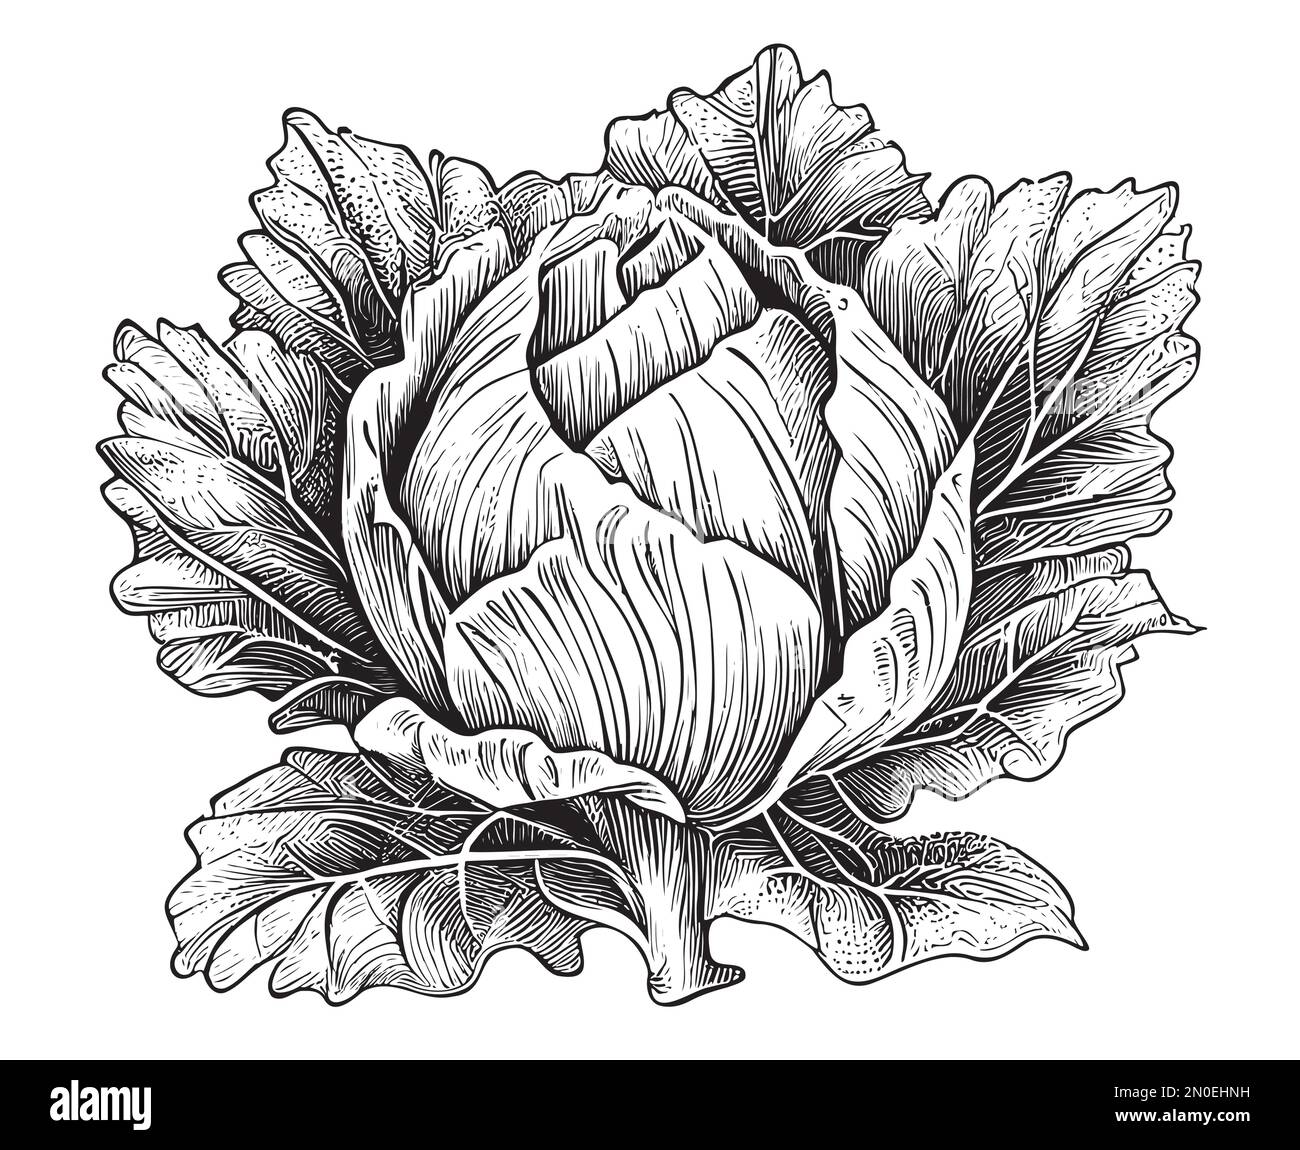 White cabbage sketch hand drawn in doodle style illustration Stock Vector